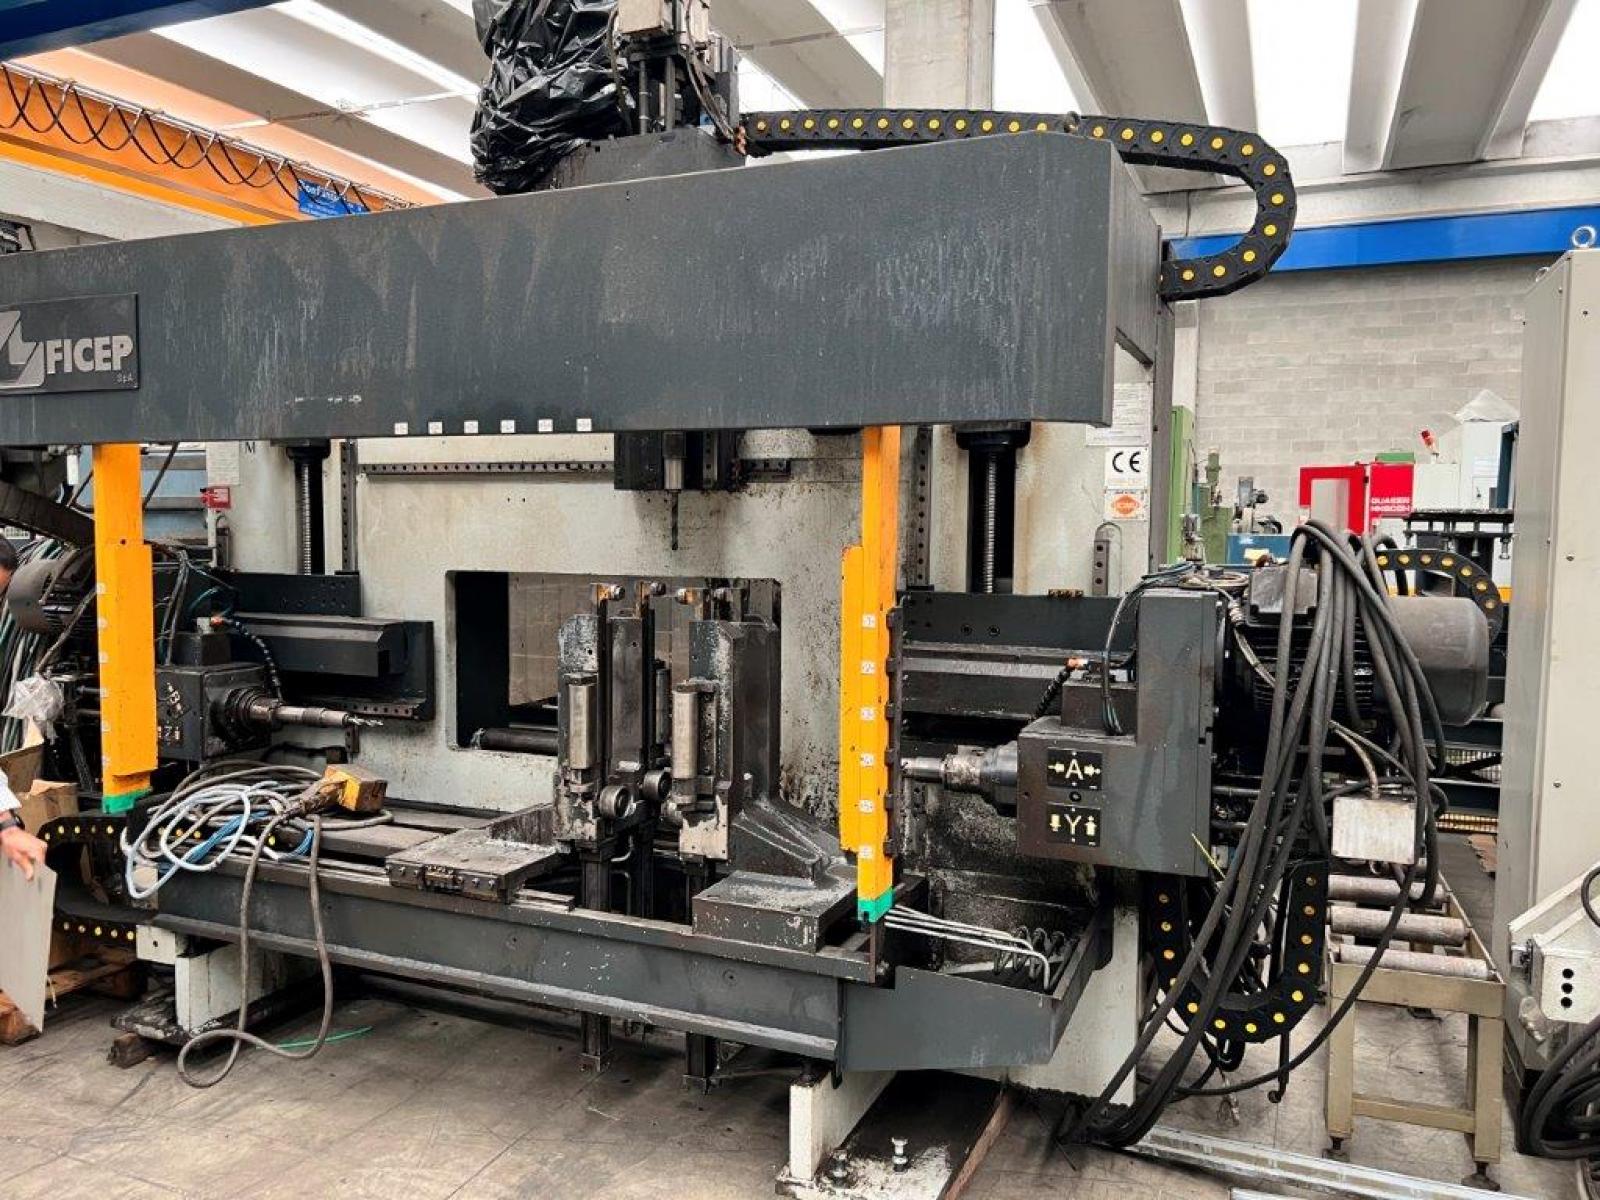 FORATRICE ficep A CNC TIPO 1003 DZB: